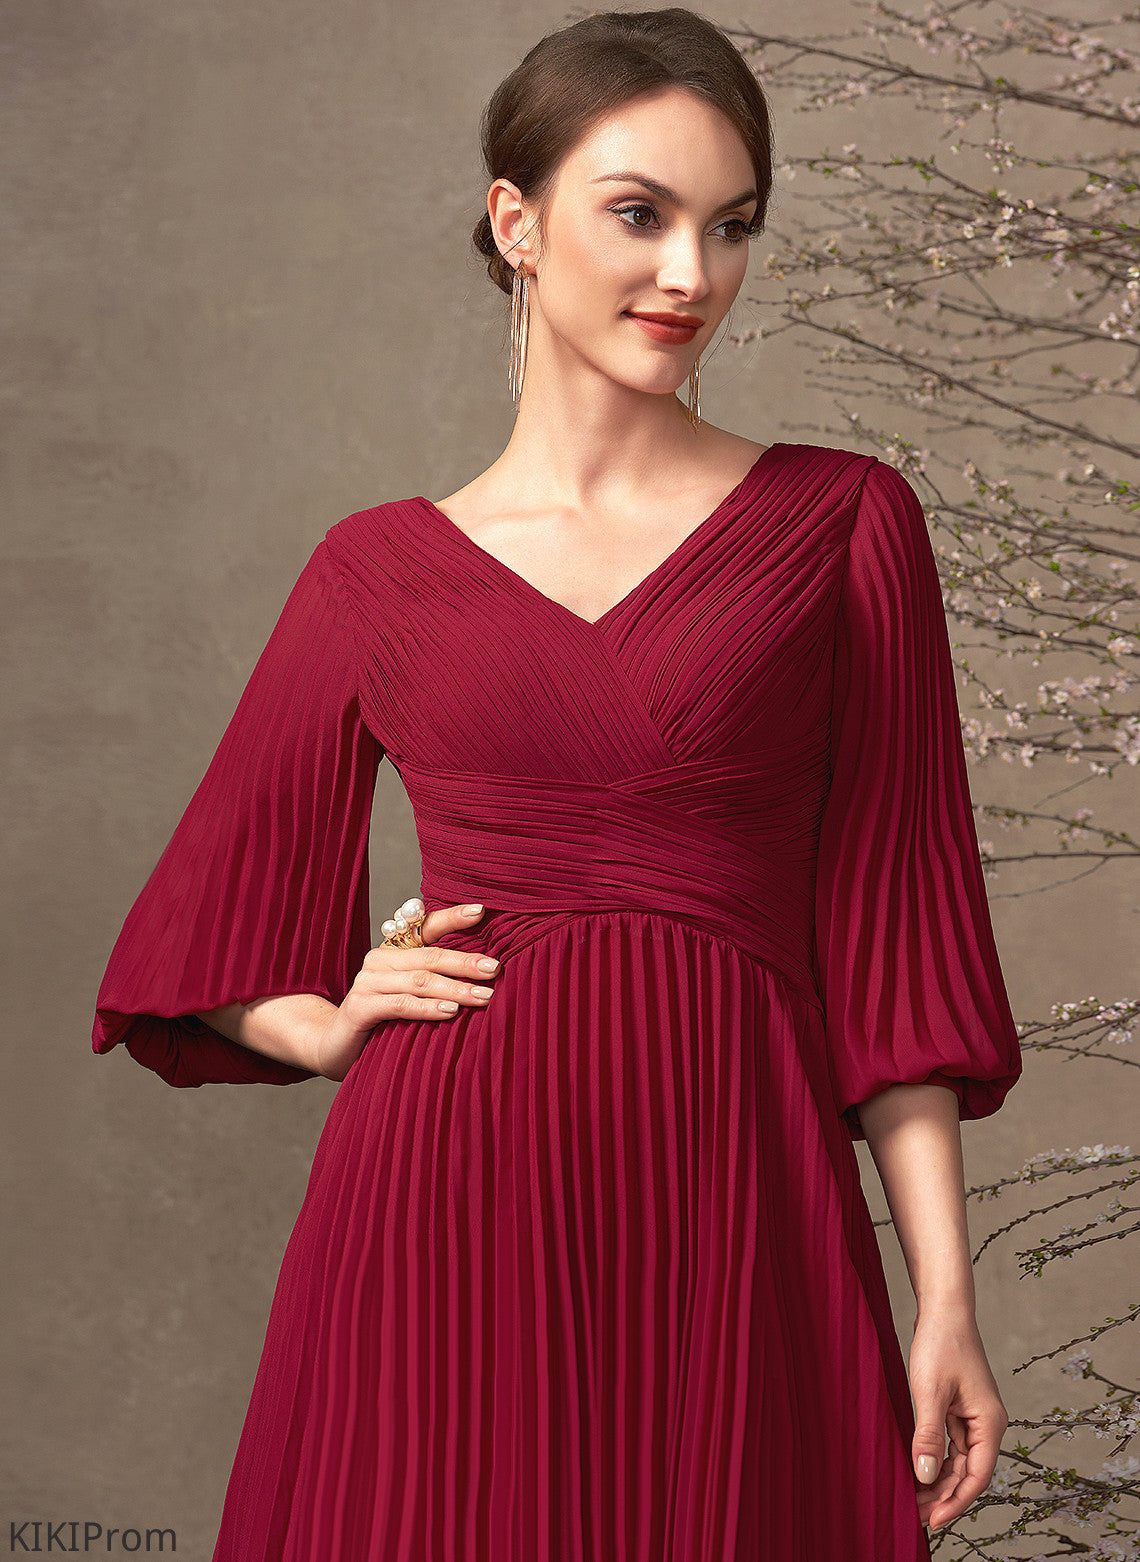 Dress Pleated With Chiffon Charlotte Cocktail Dresses V-neck A-Line Tea-Length Cocktail